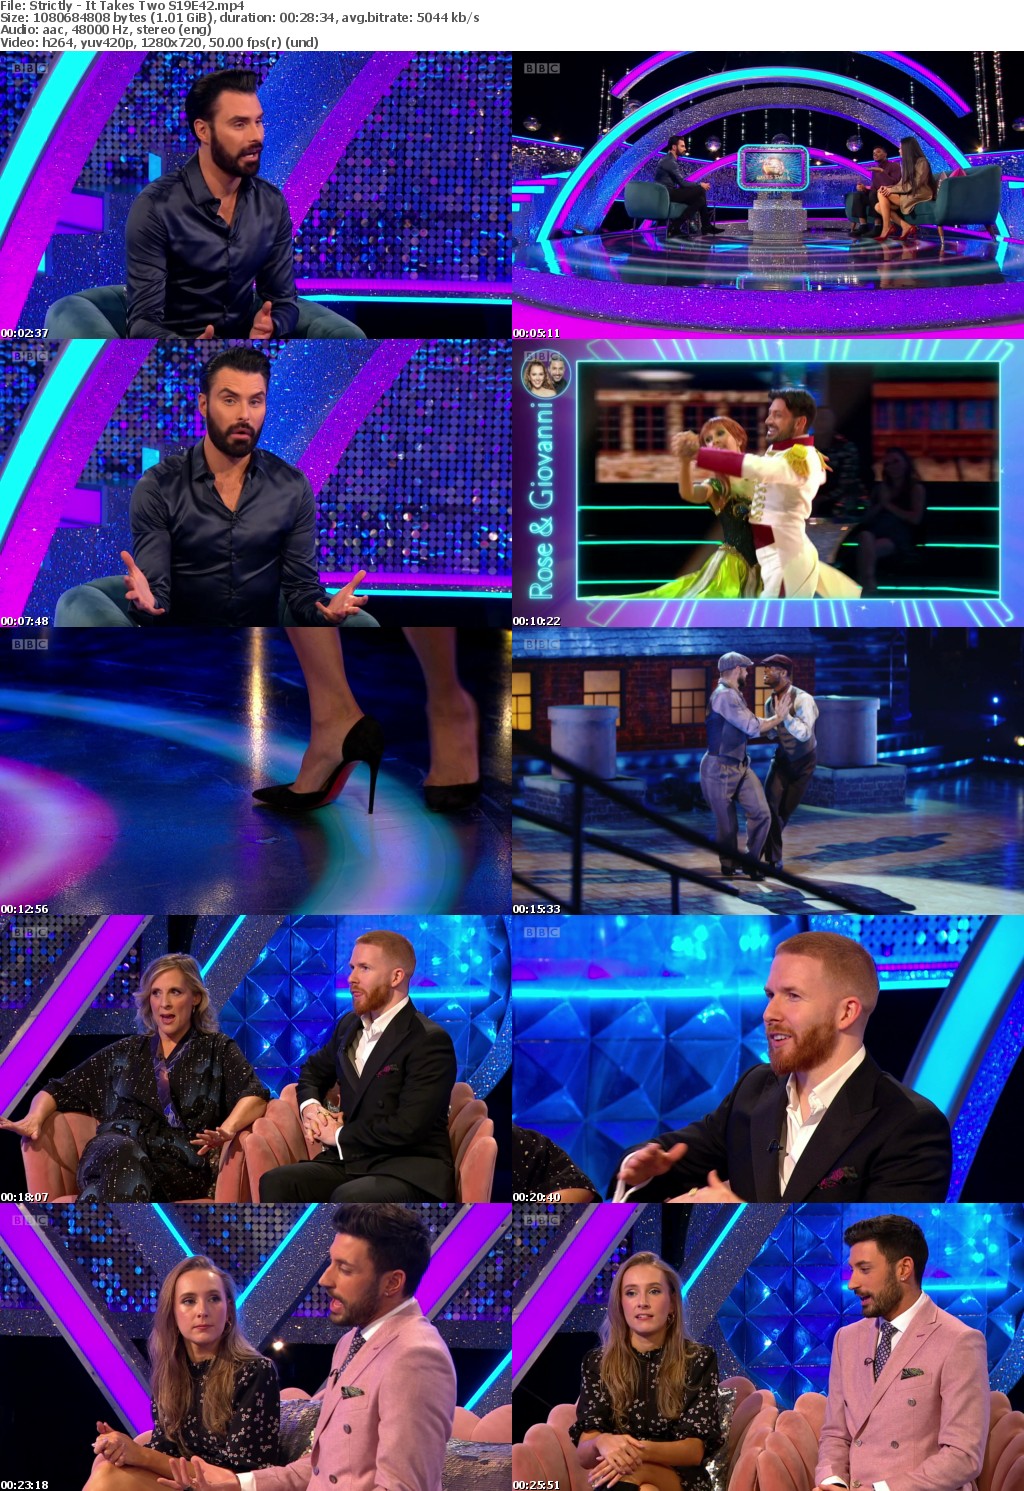 Strictly - It Takes Two S19E42 (1280x720p HD, 50fps, soft Eng subs)